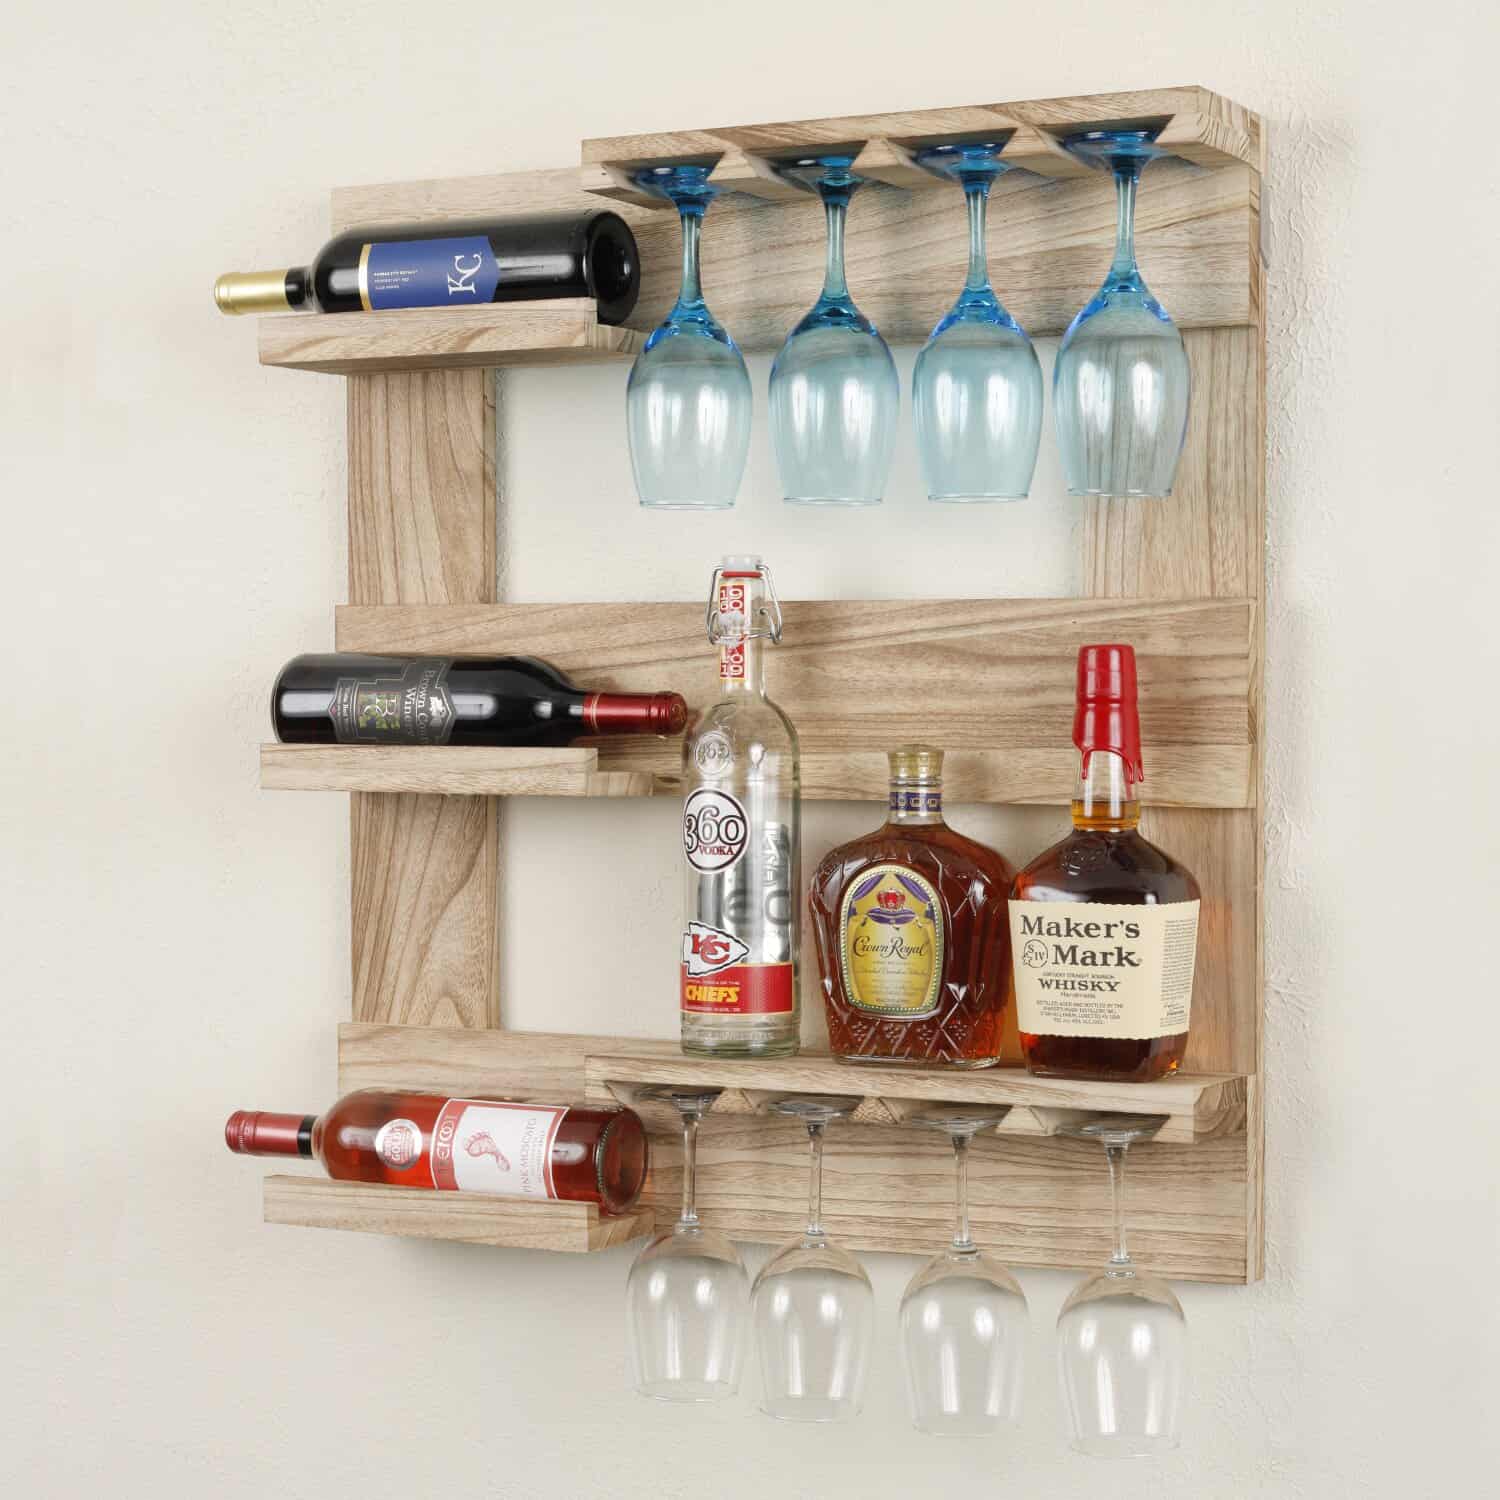 What's A Rustic Home Without Its Wine Rack?